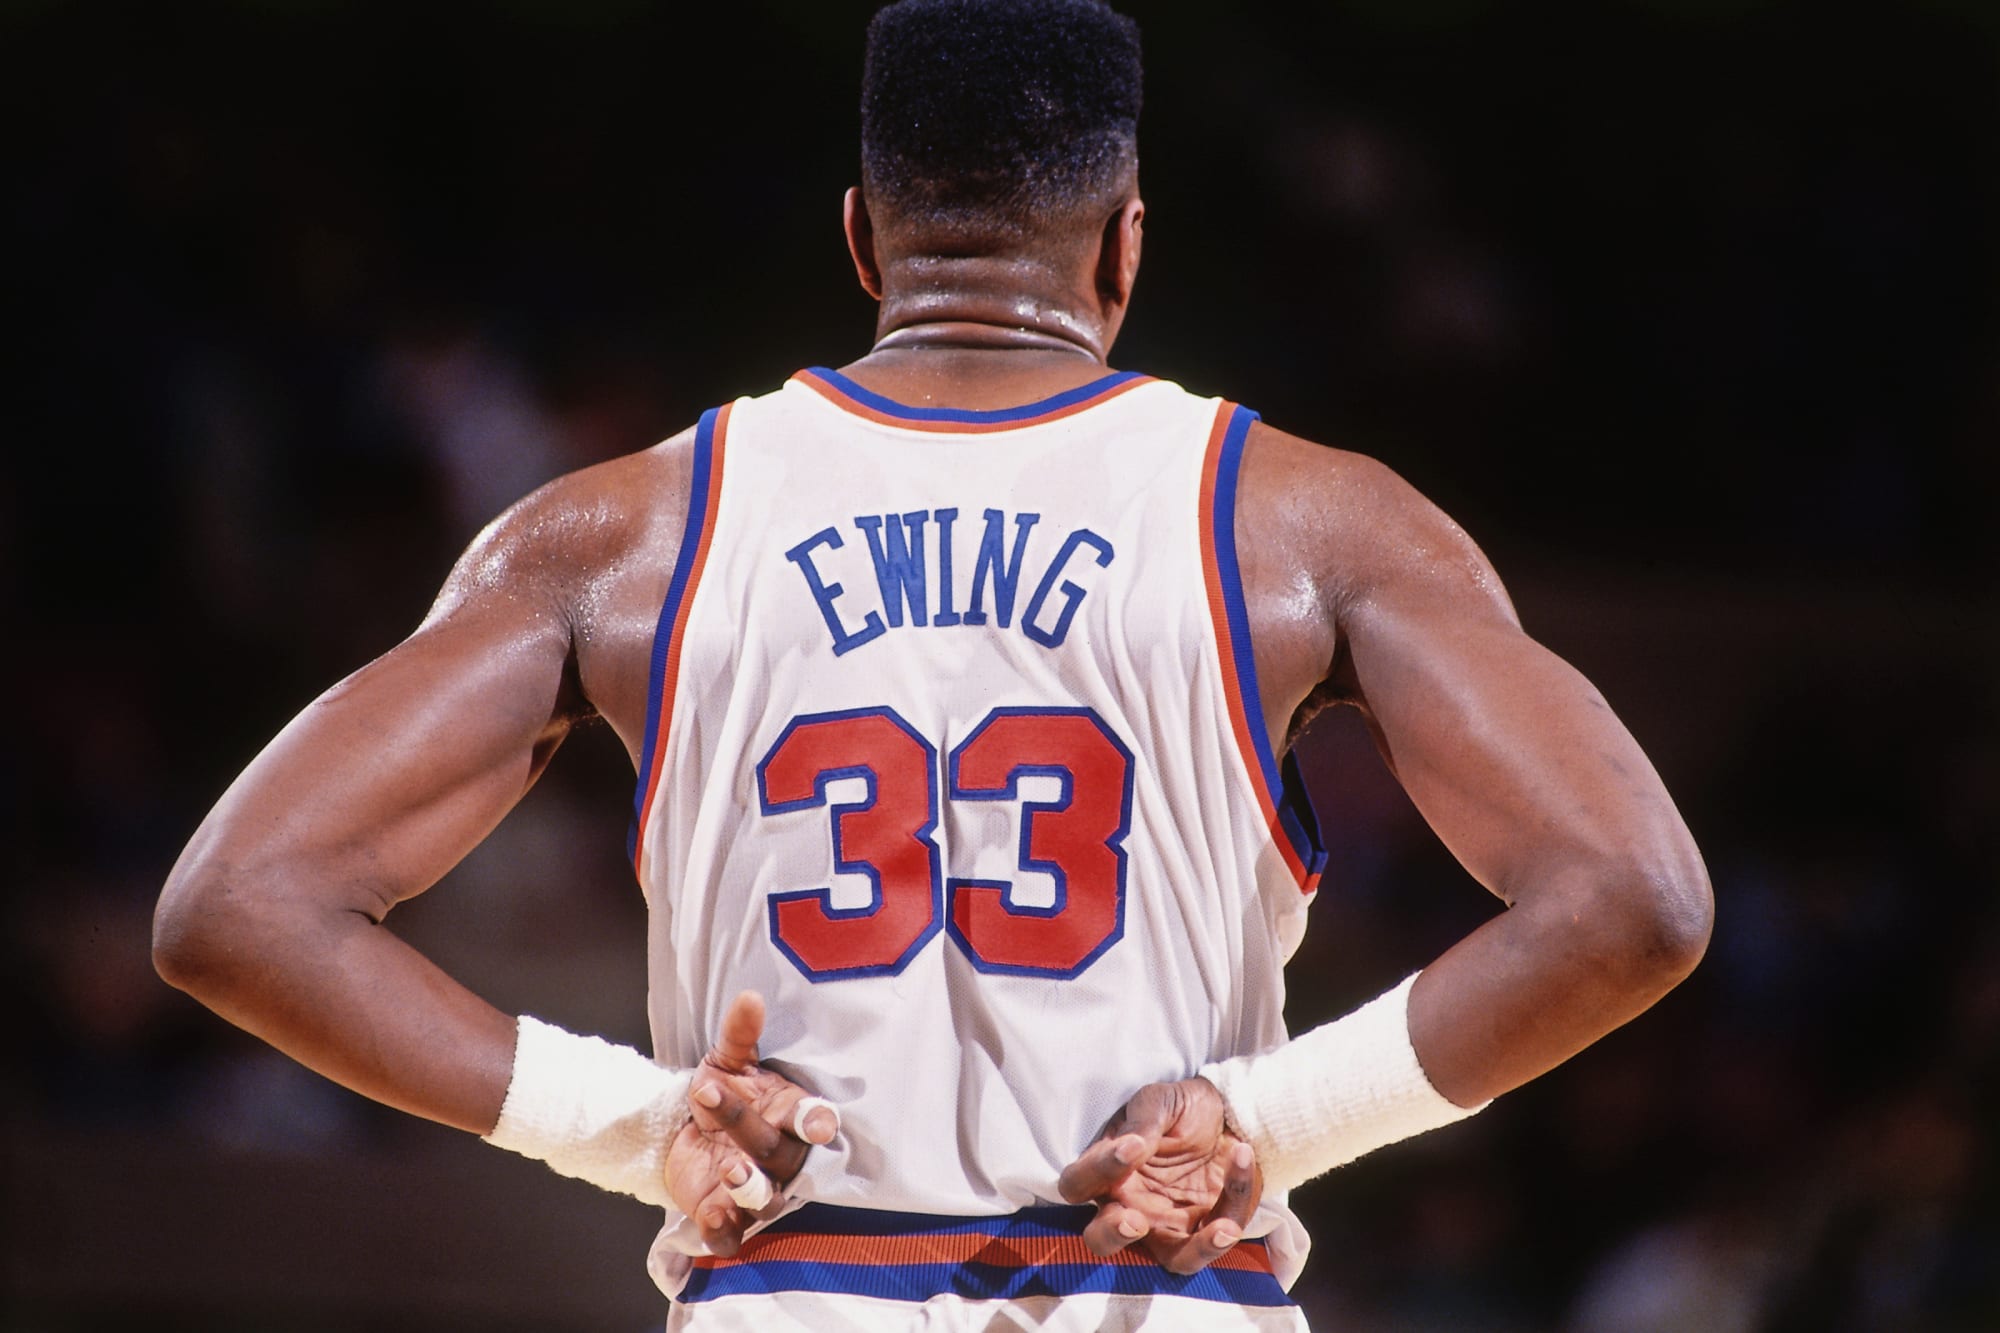 NBA: Patrick Ewing named the greatest New York Knicks player of all time